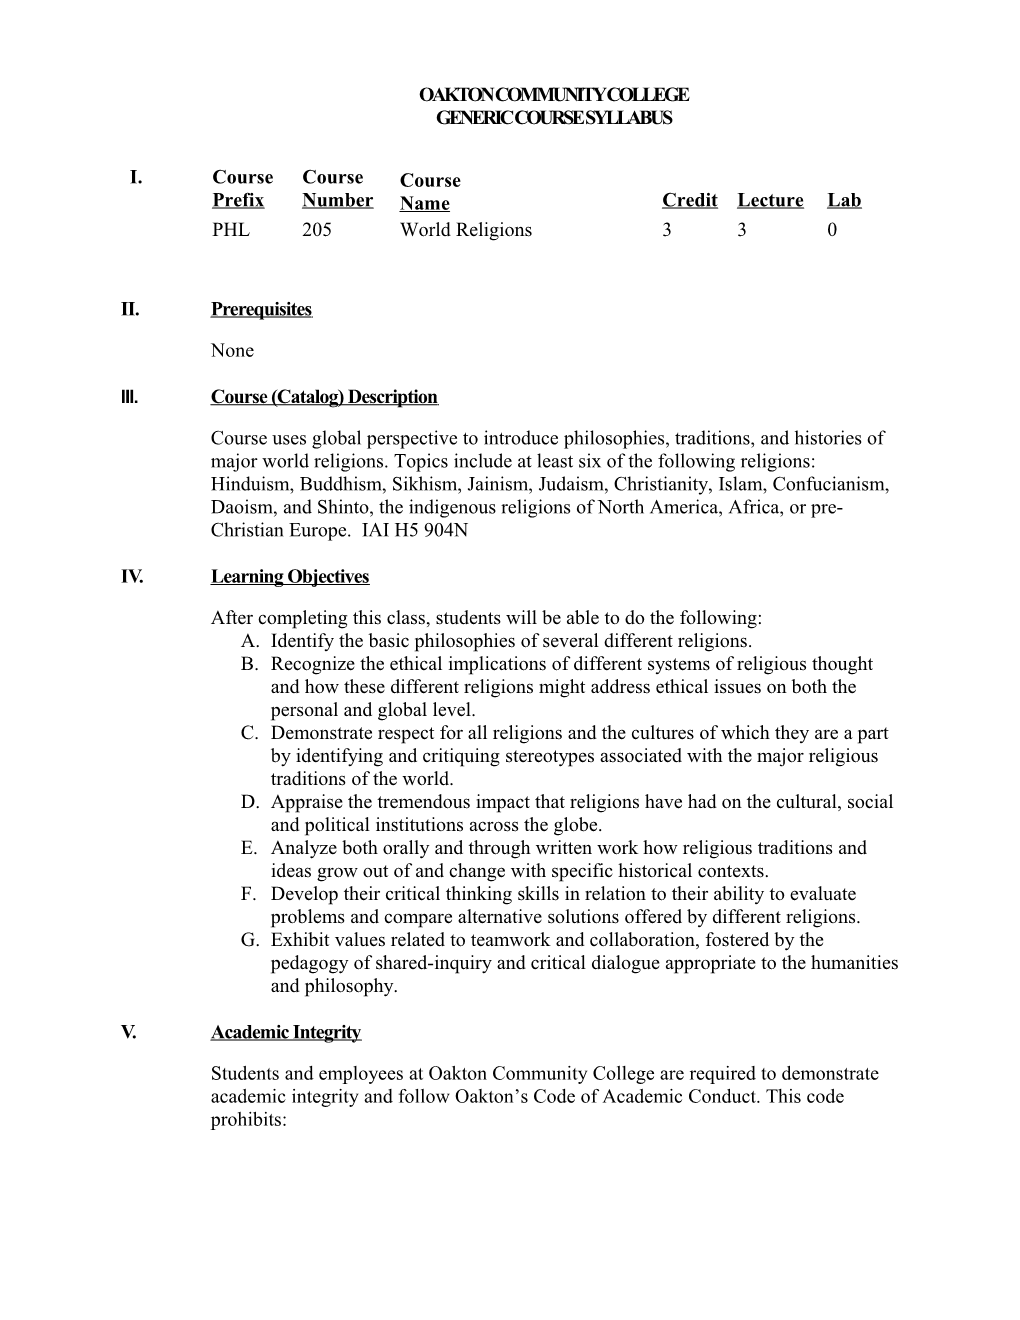 COURSE SYLLABUS (GENERIC) Page 6